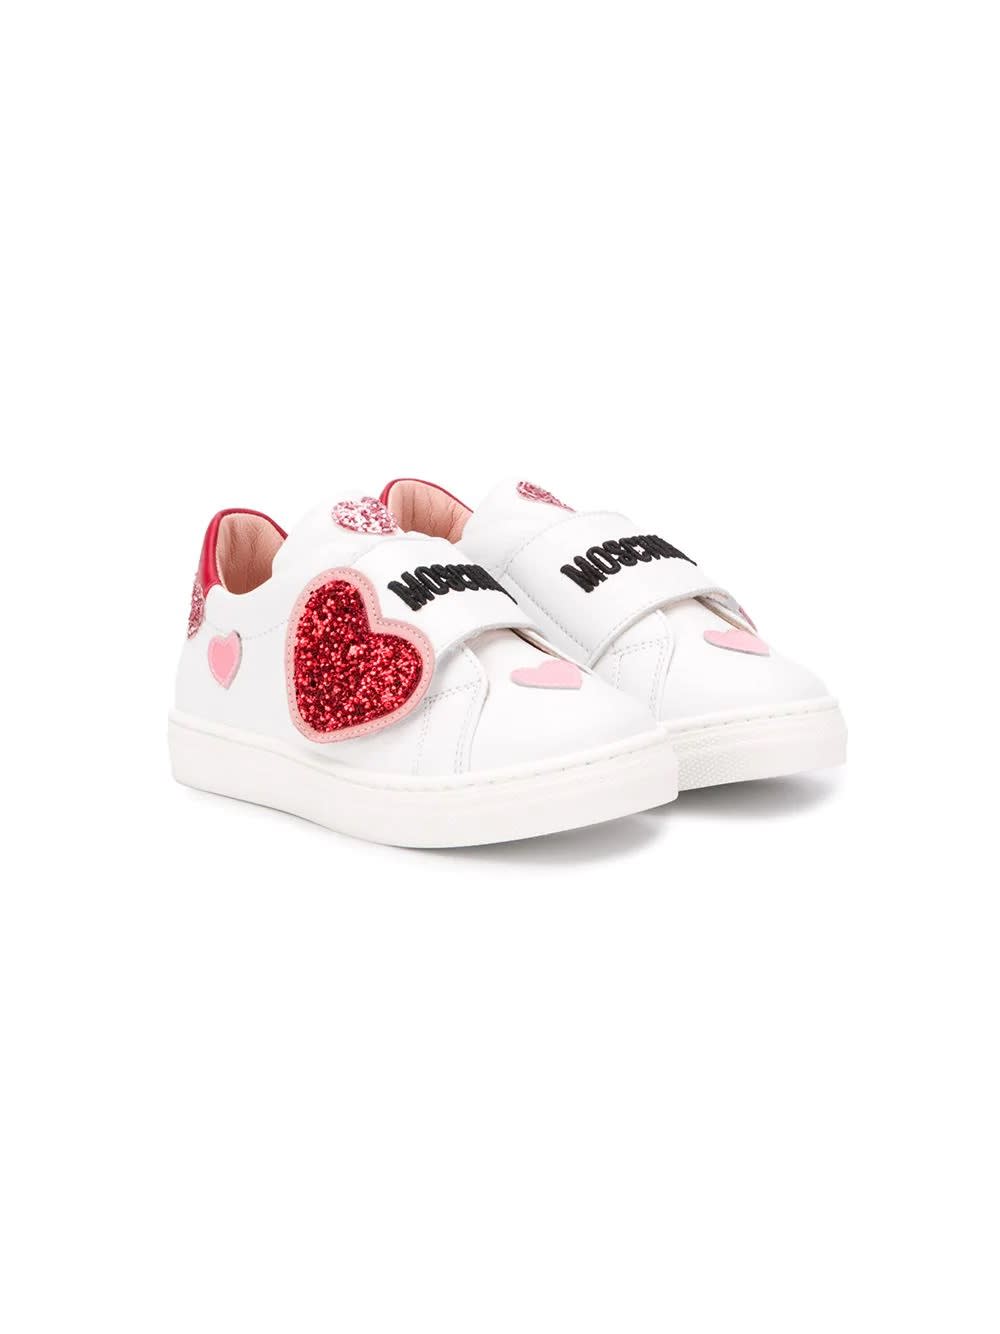 moschino childrens shoes